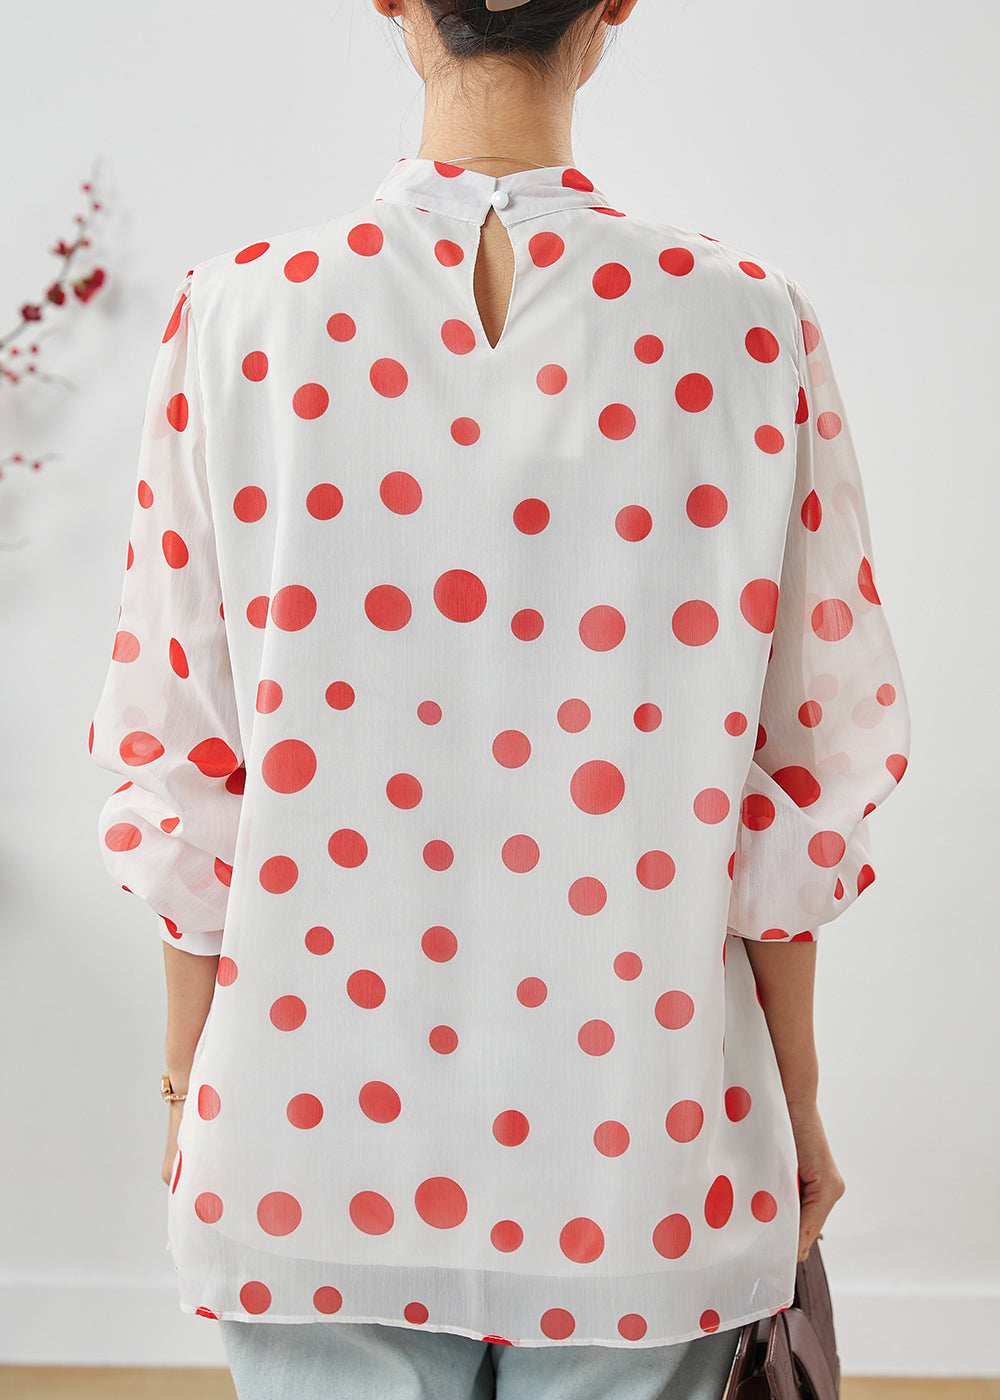 French White Stand Collar Dot Print Chiffon Blouses Spring